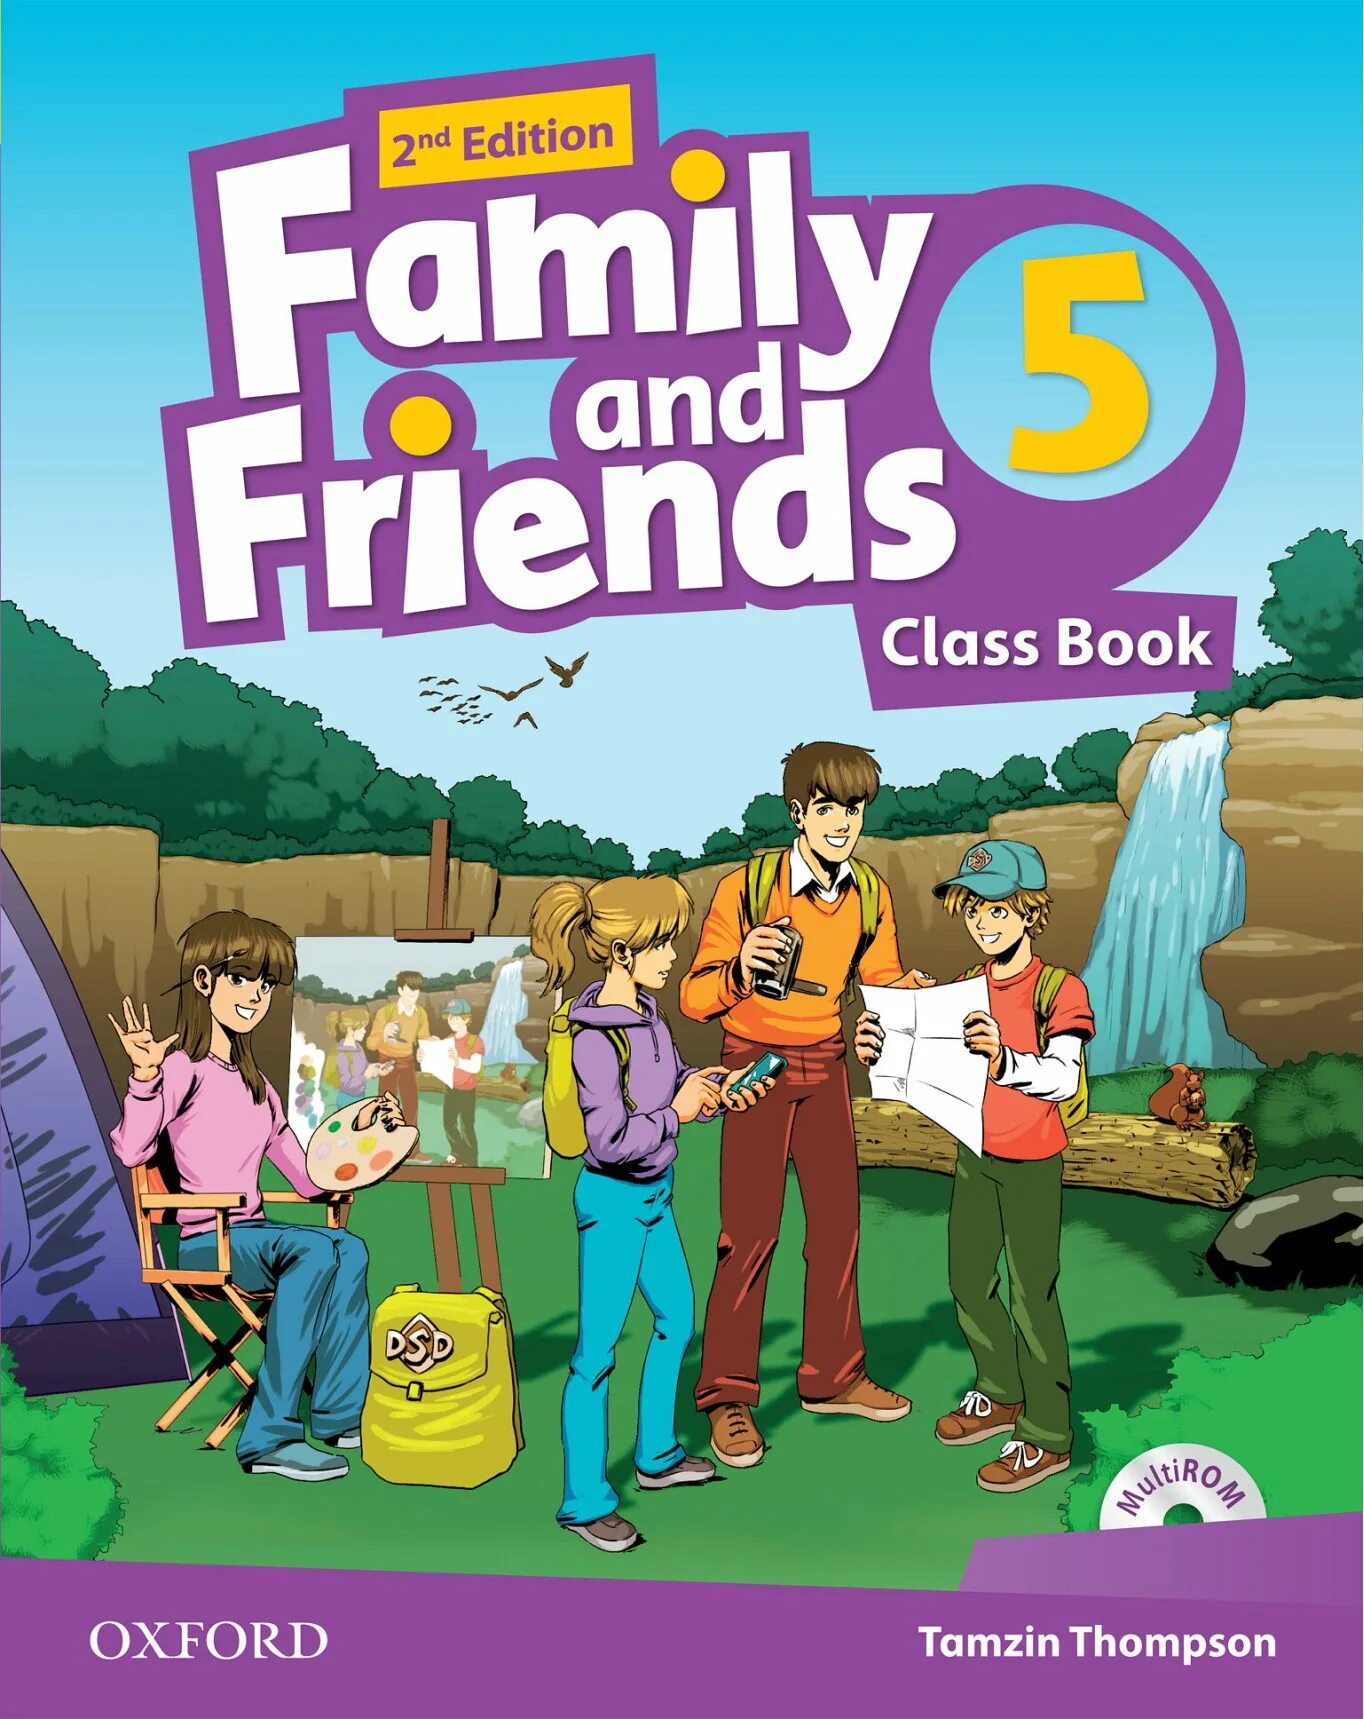 Family student book. Учебник Family and friends 5. Фэмили френдс 6. \Фэмили энд френдс 2 издание. Family and friends 3 2nd Edition.